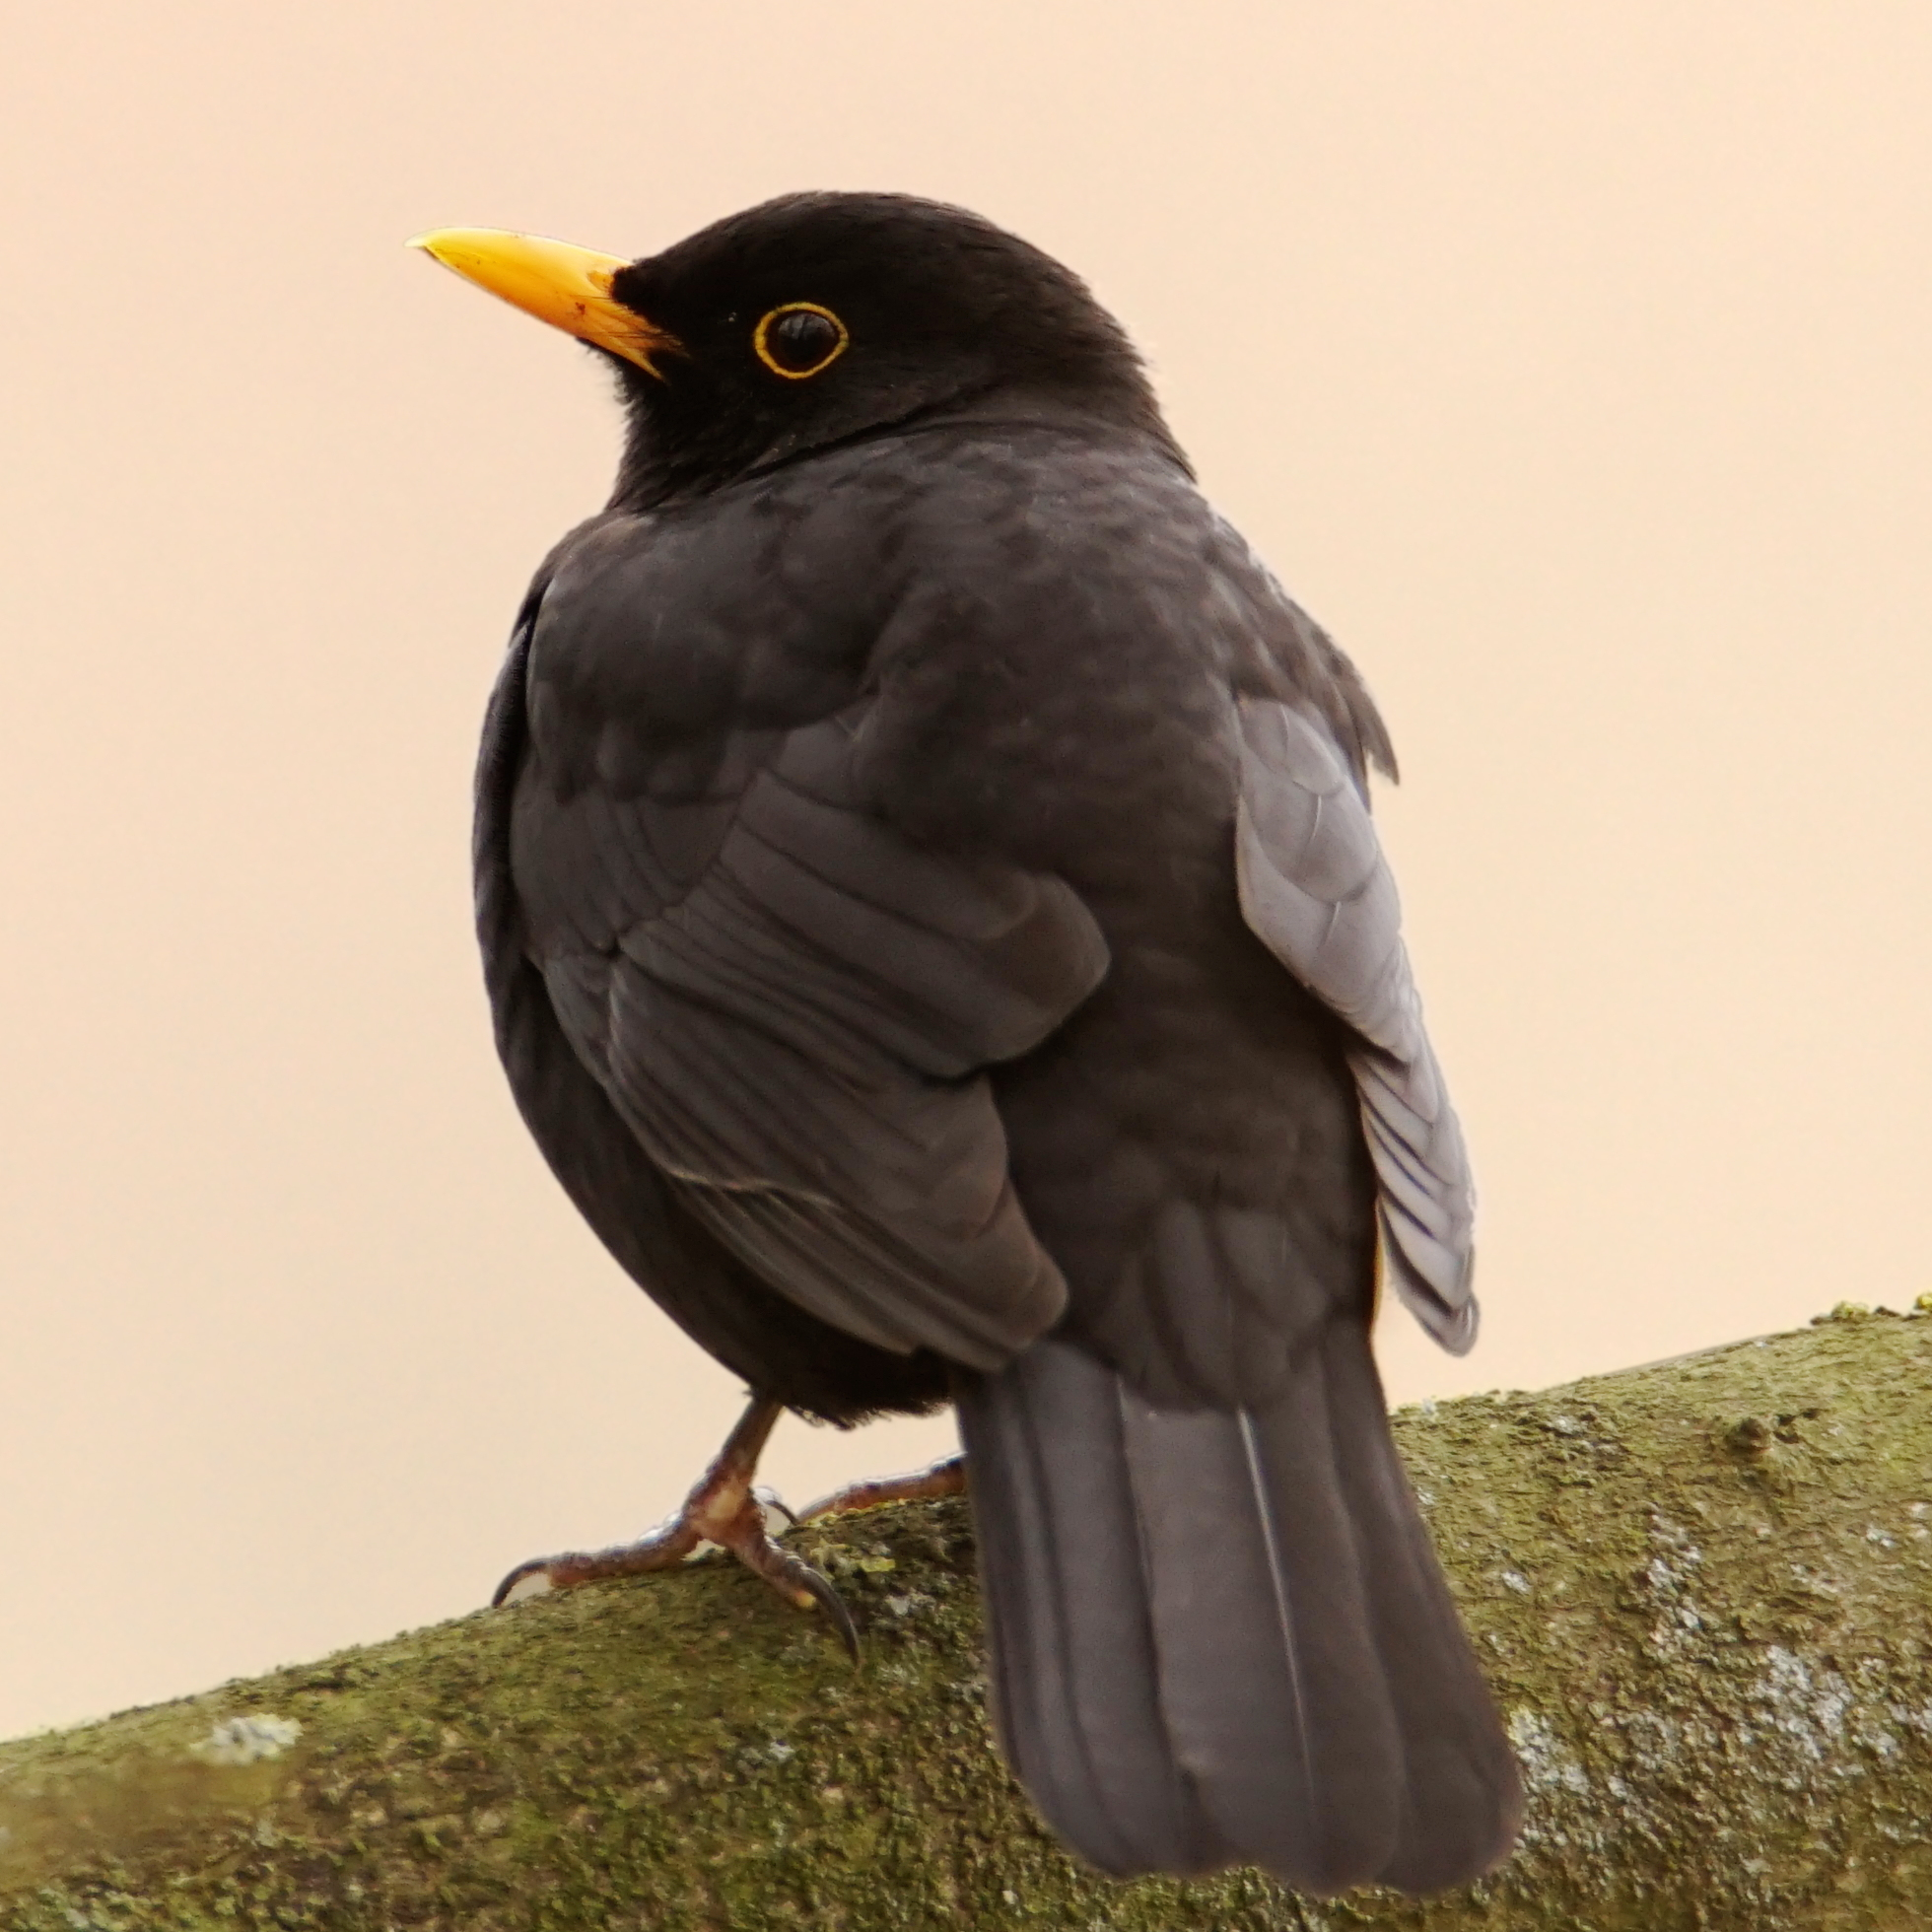 A photo of a blackbird sitting on a branch from behind.